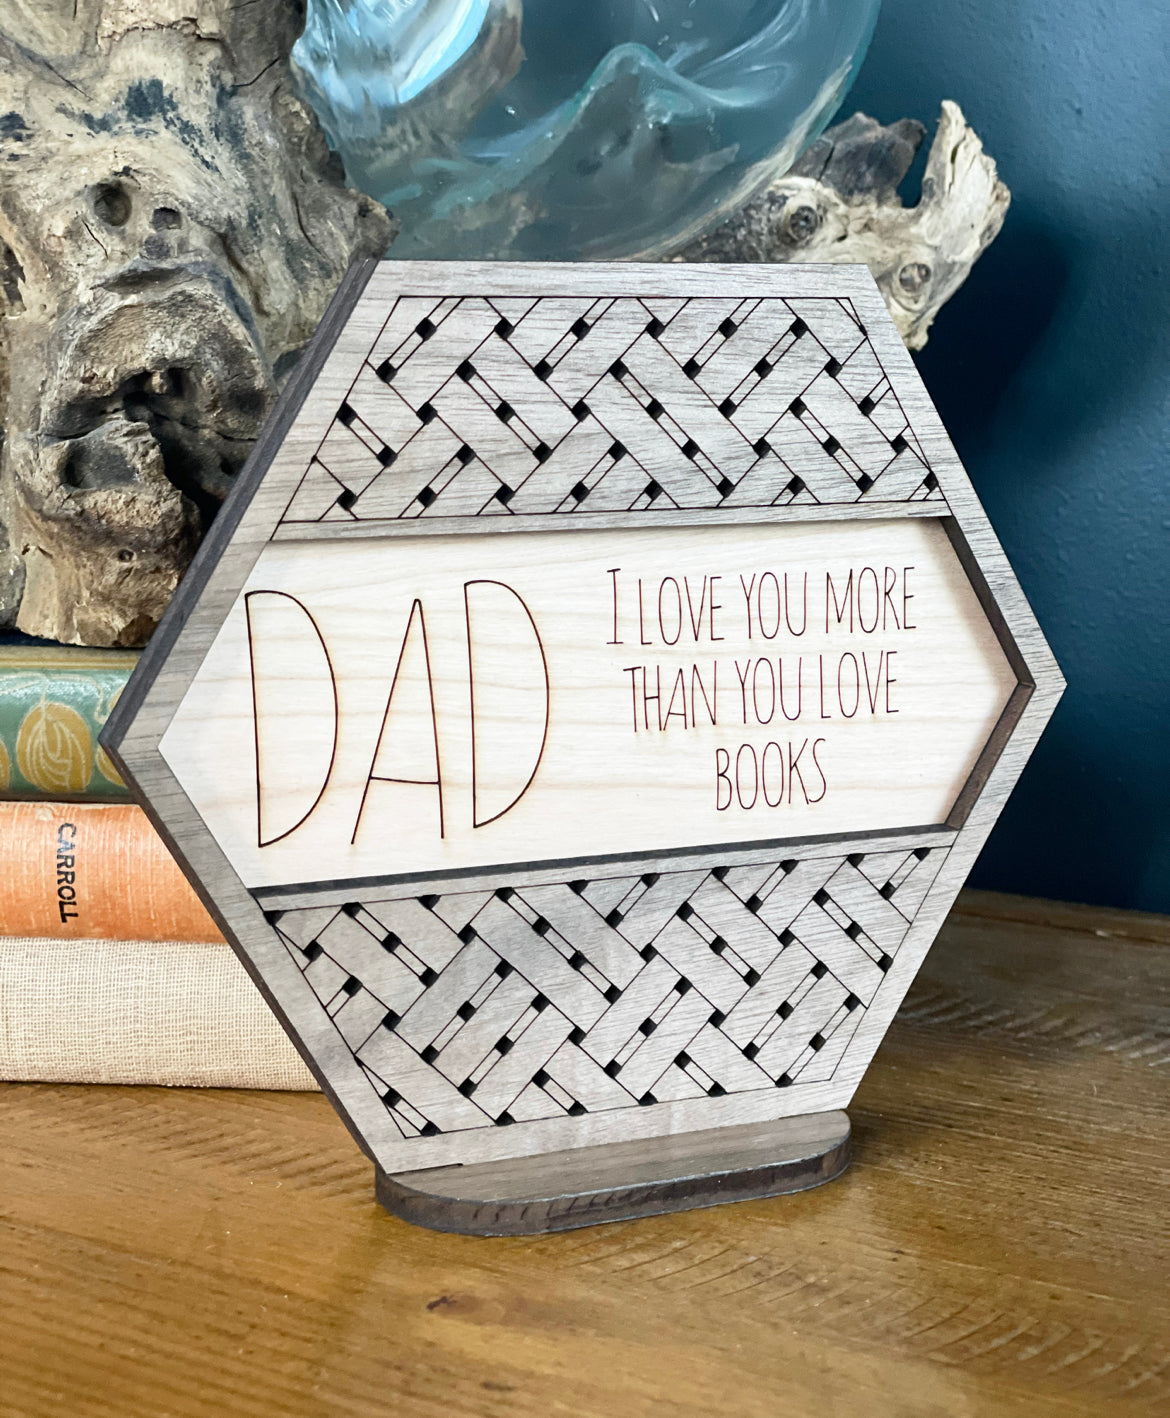 Funny Father’s Day Signs | Gift for Dad | Gift for Him